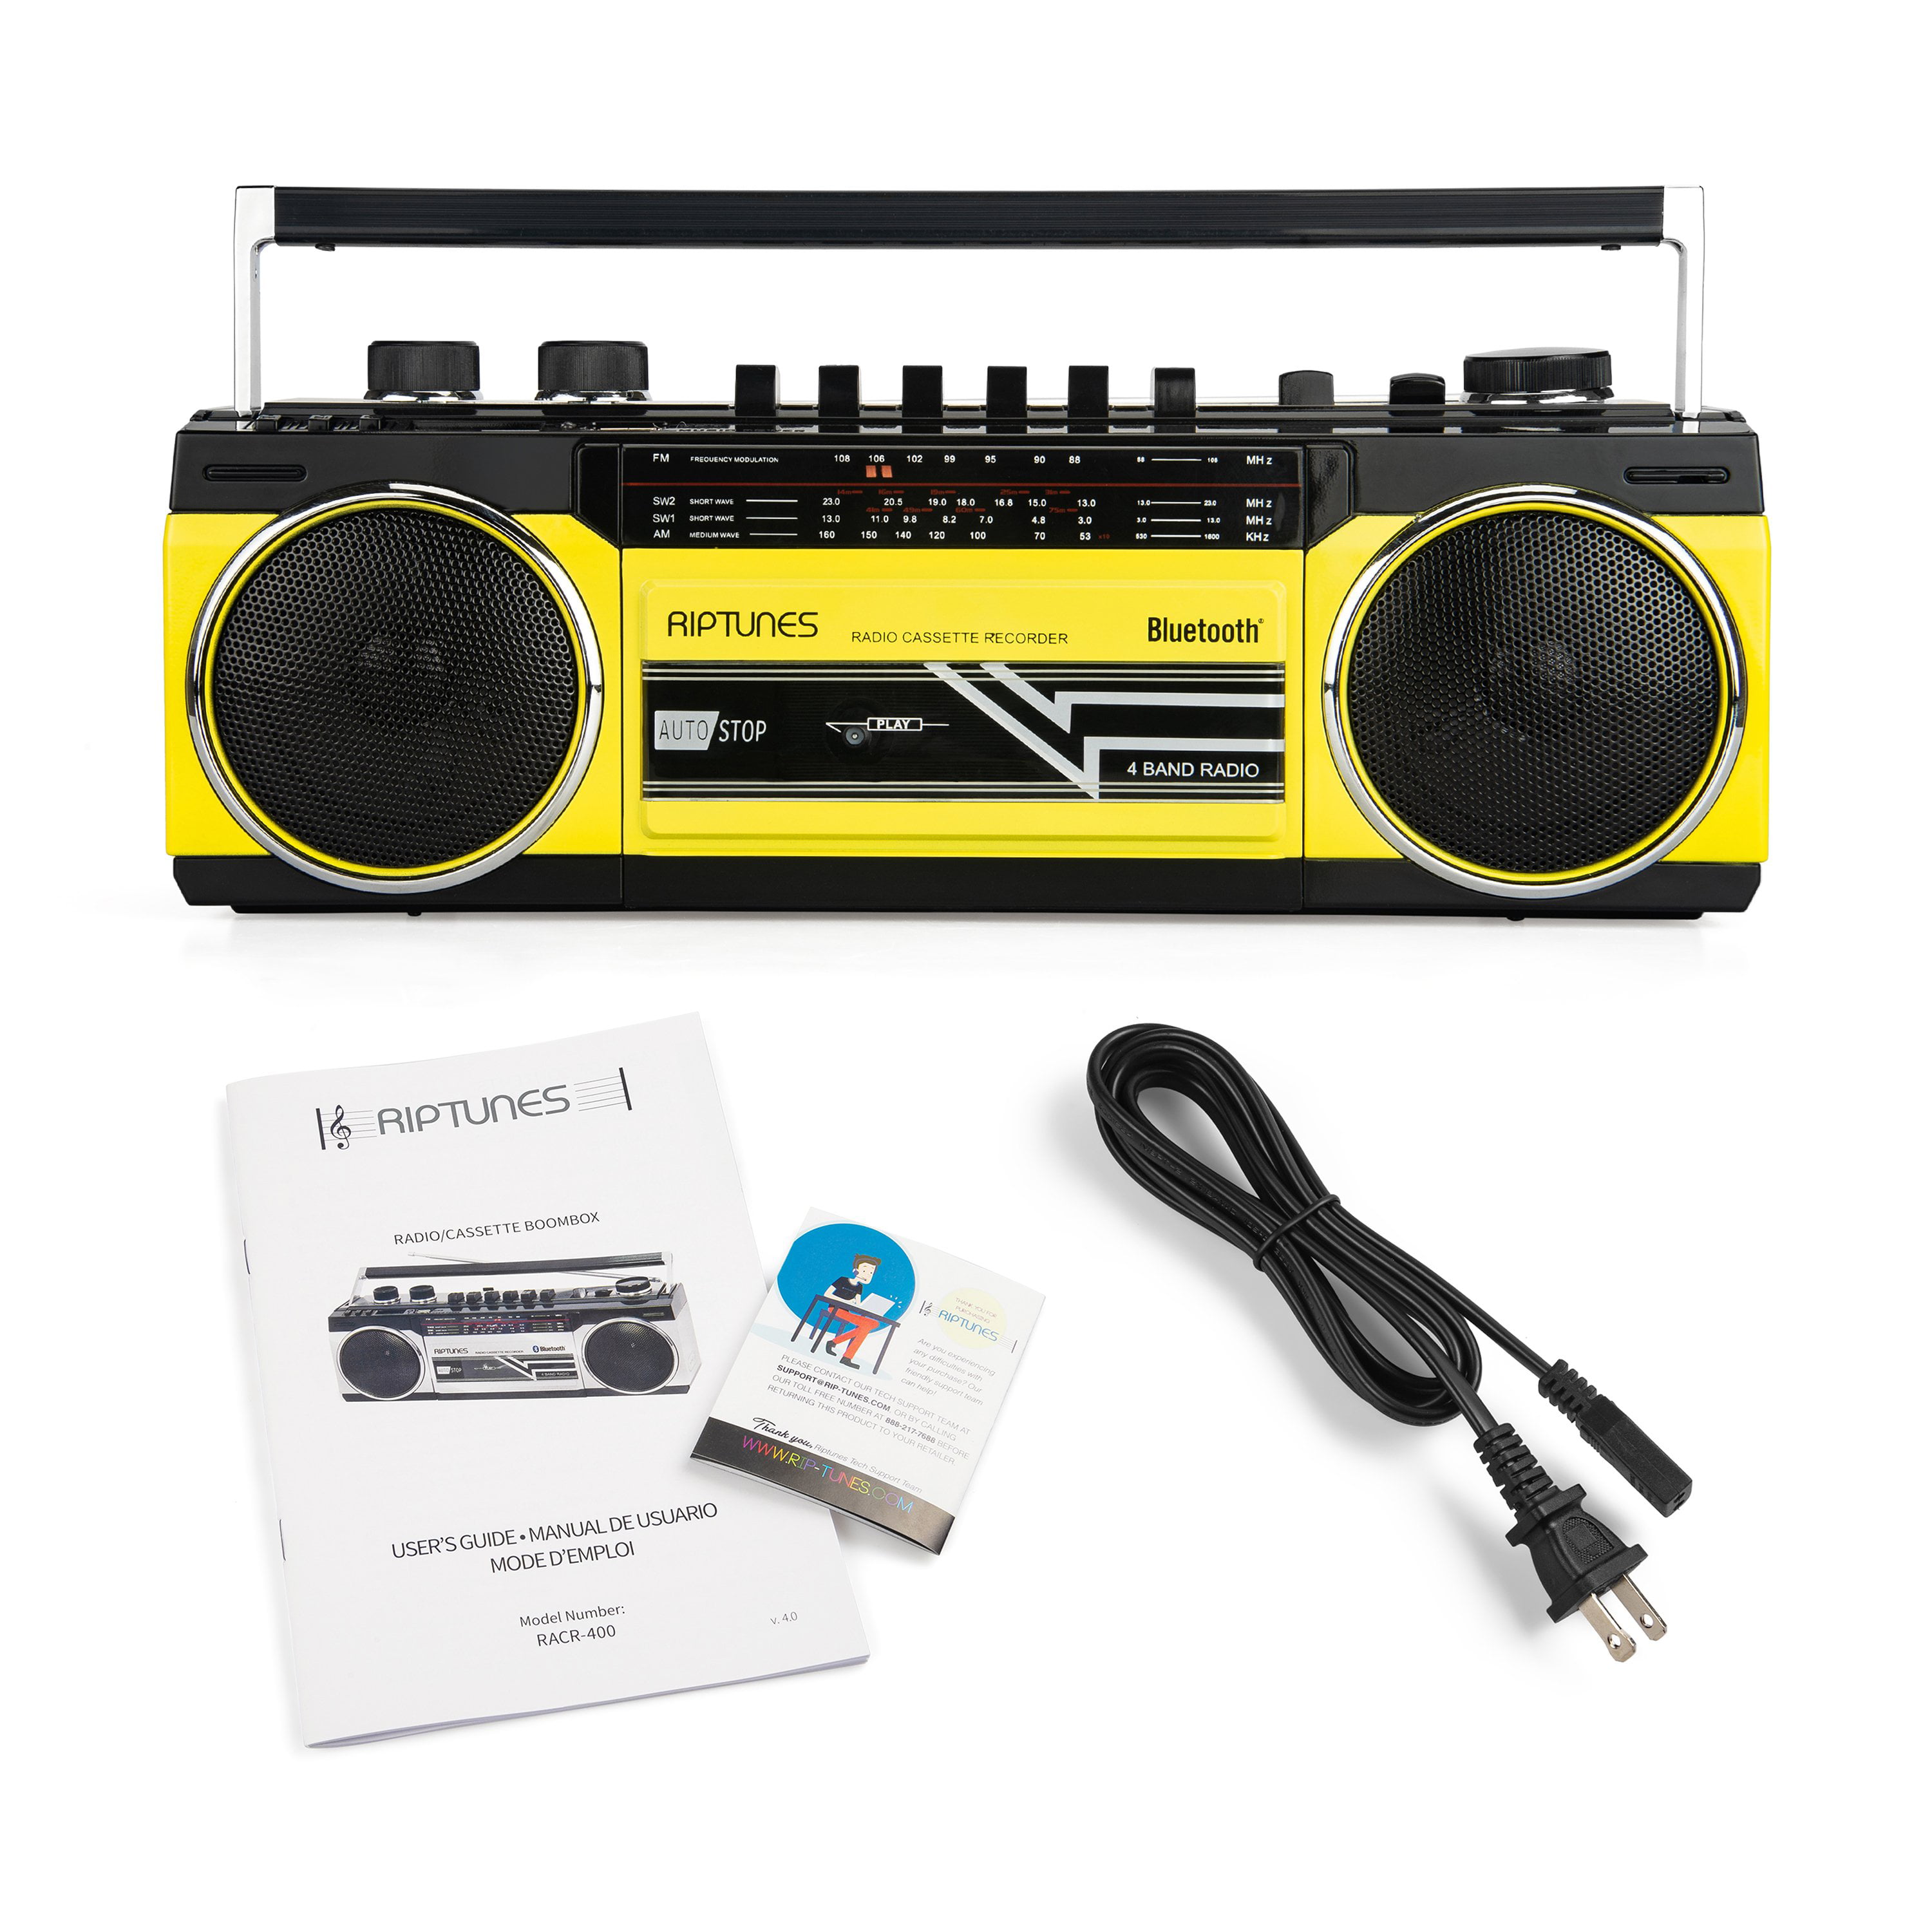 AM/FM/SW1/SW2 Retro Radio Cassette Band Radio Recorder, Blueooth and with Boombox Player Riptunes